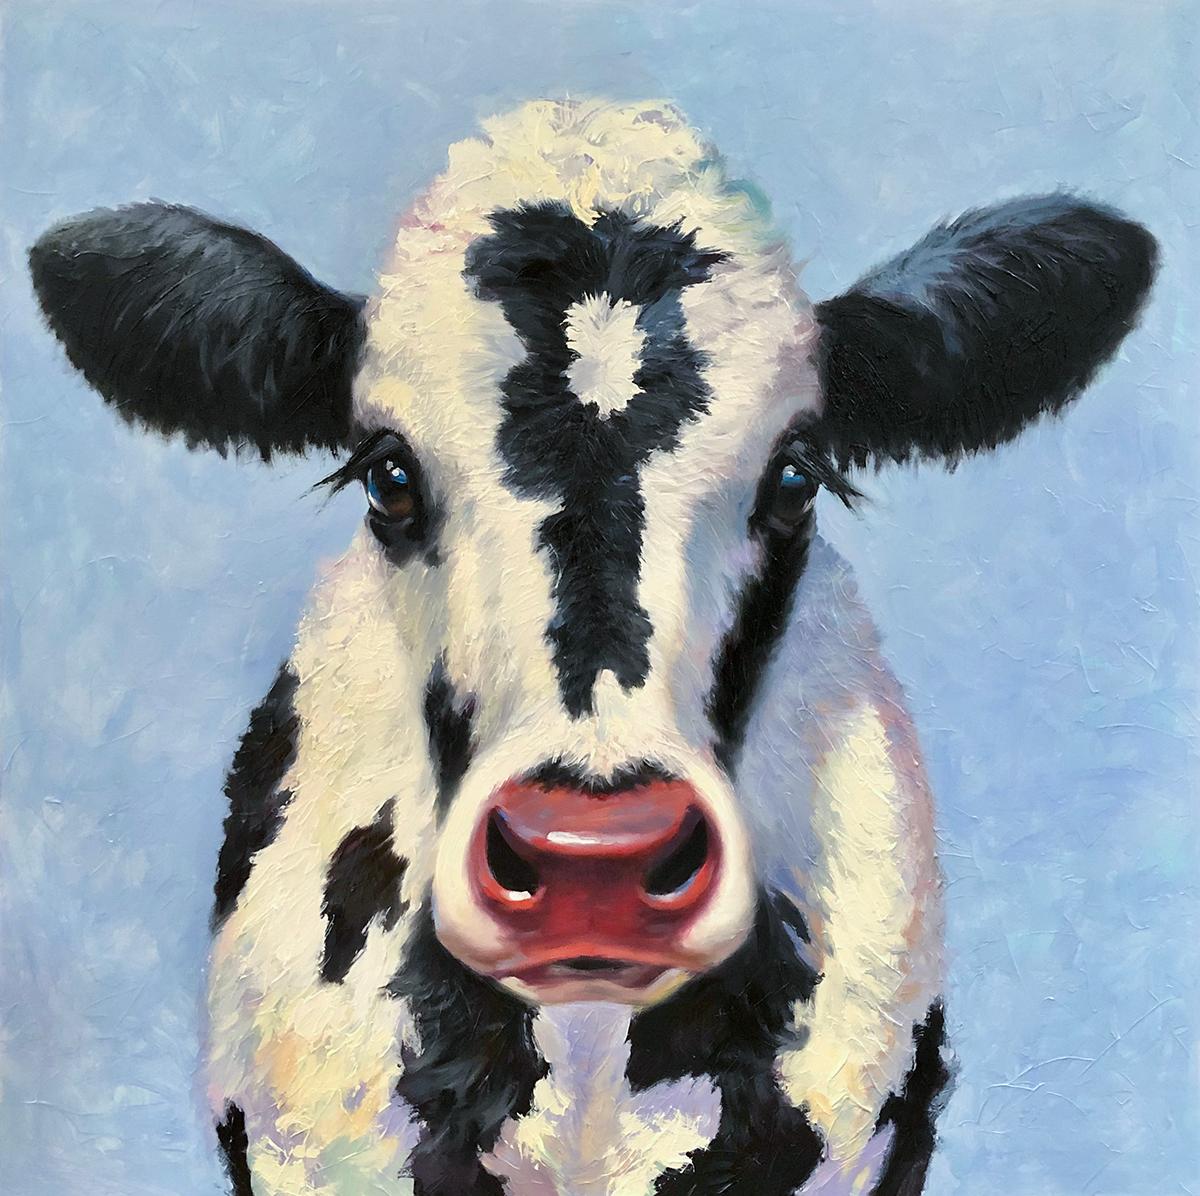 Shawn Faust, "Holstein III", 36x36 Cow Portrait Oil Painting on Canvas 